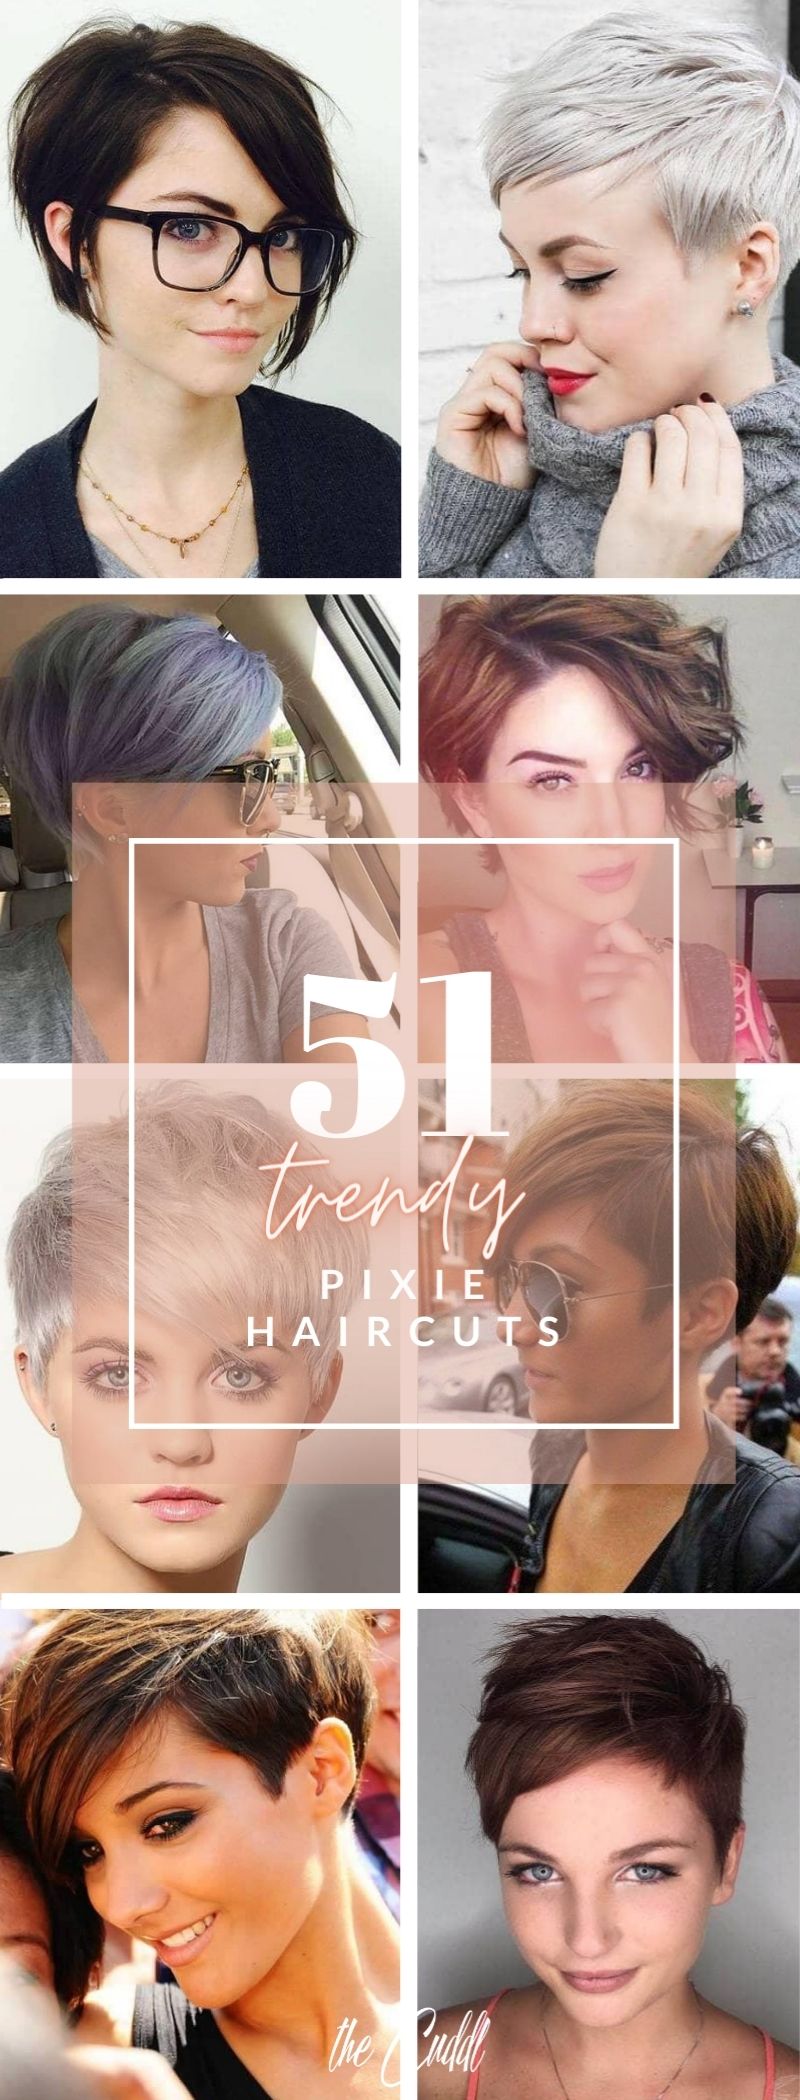 50 Pixie Haircuts You’ll See Trending